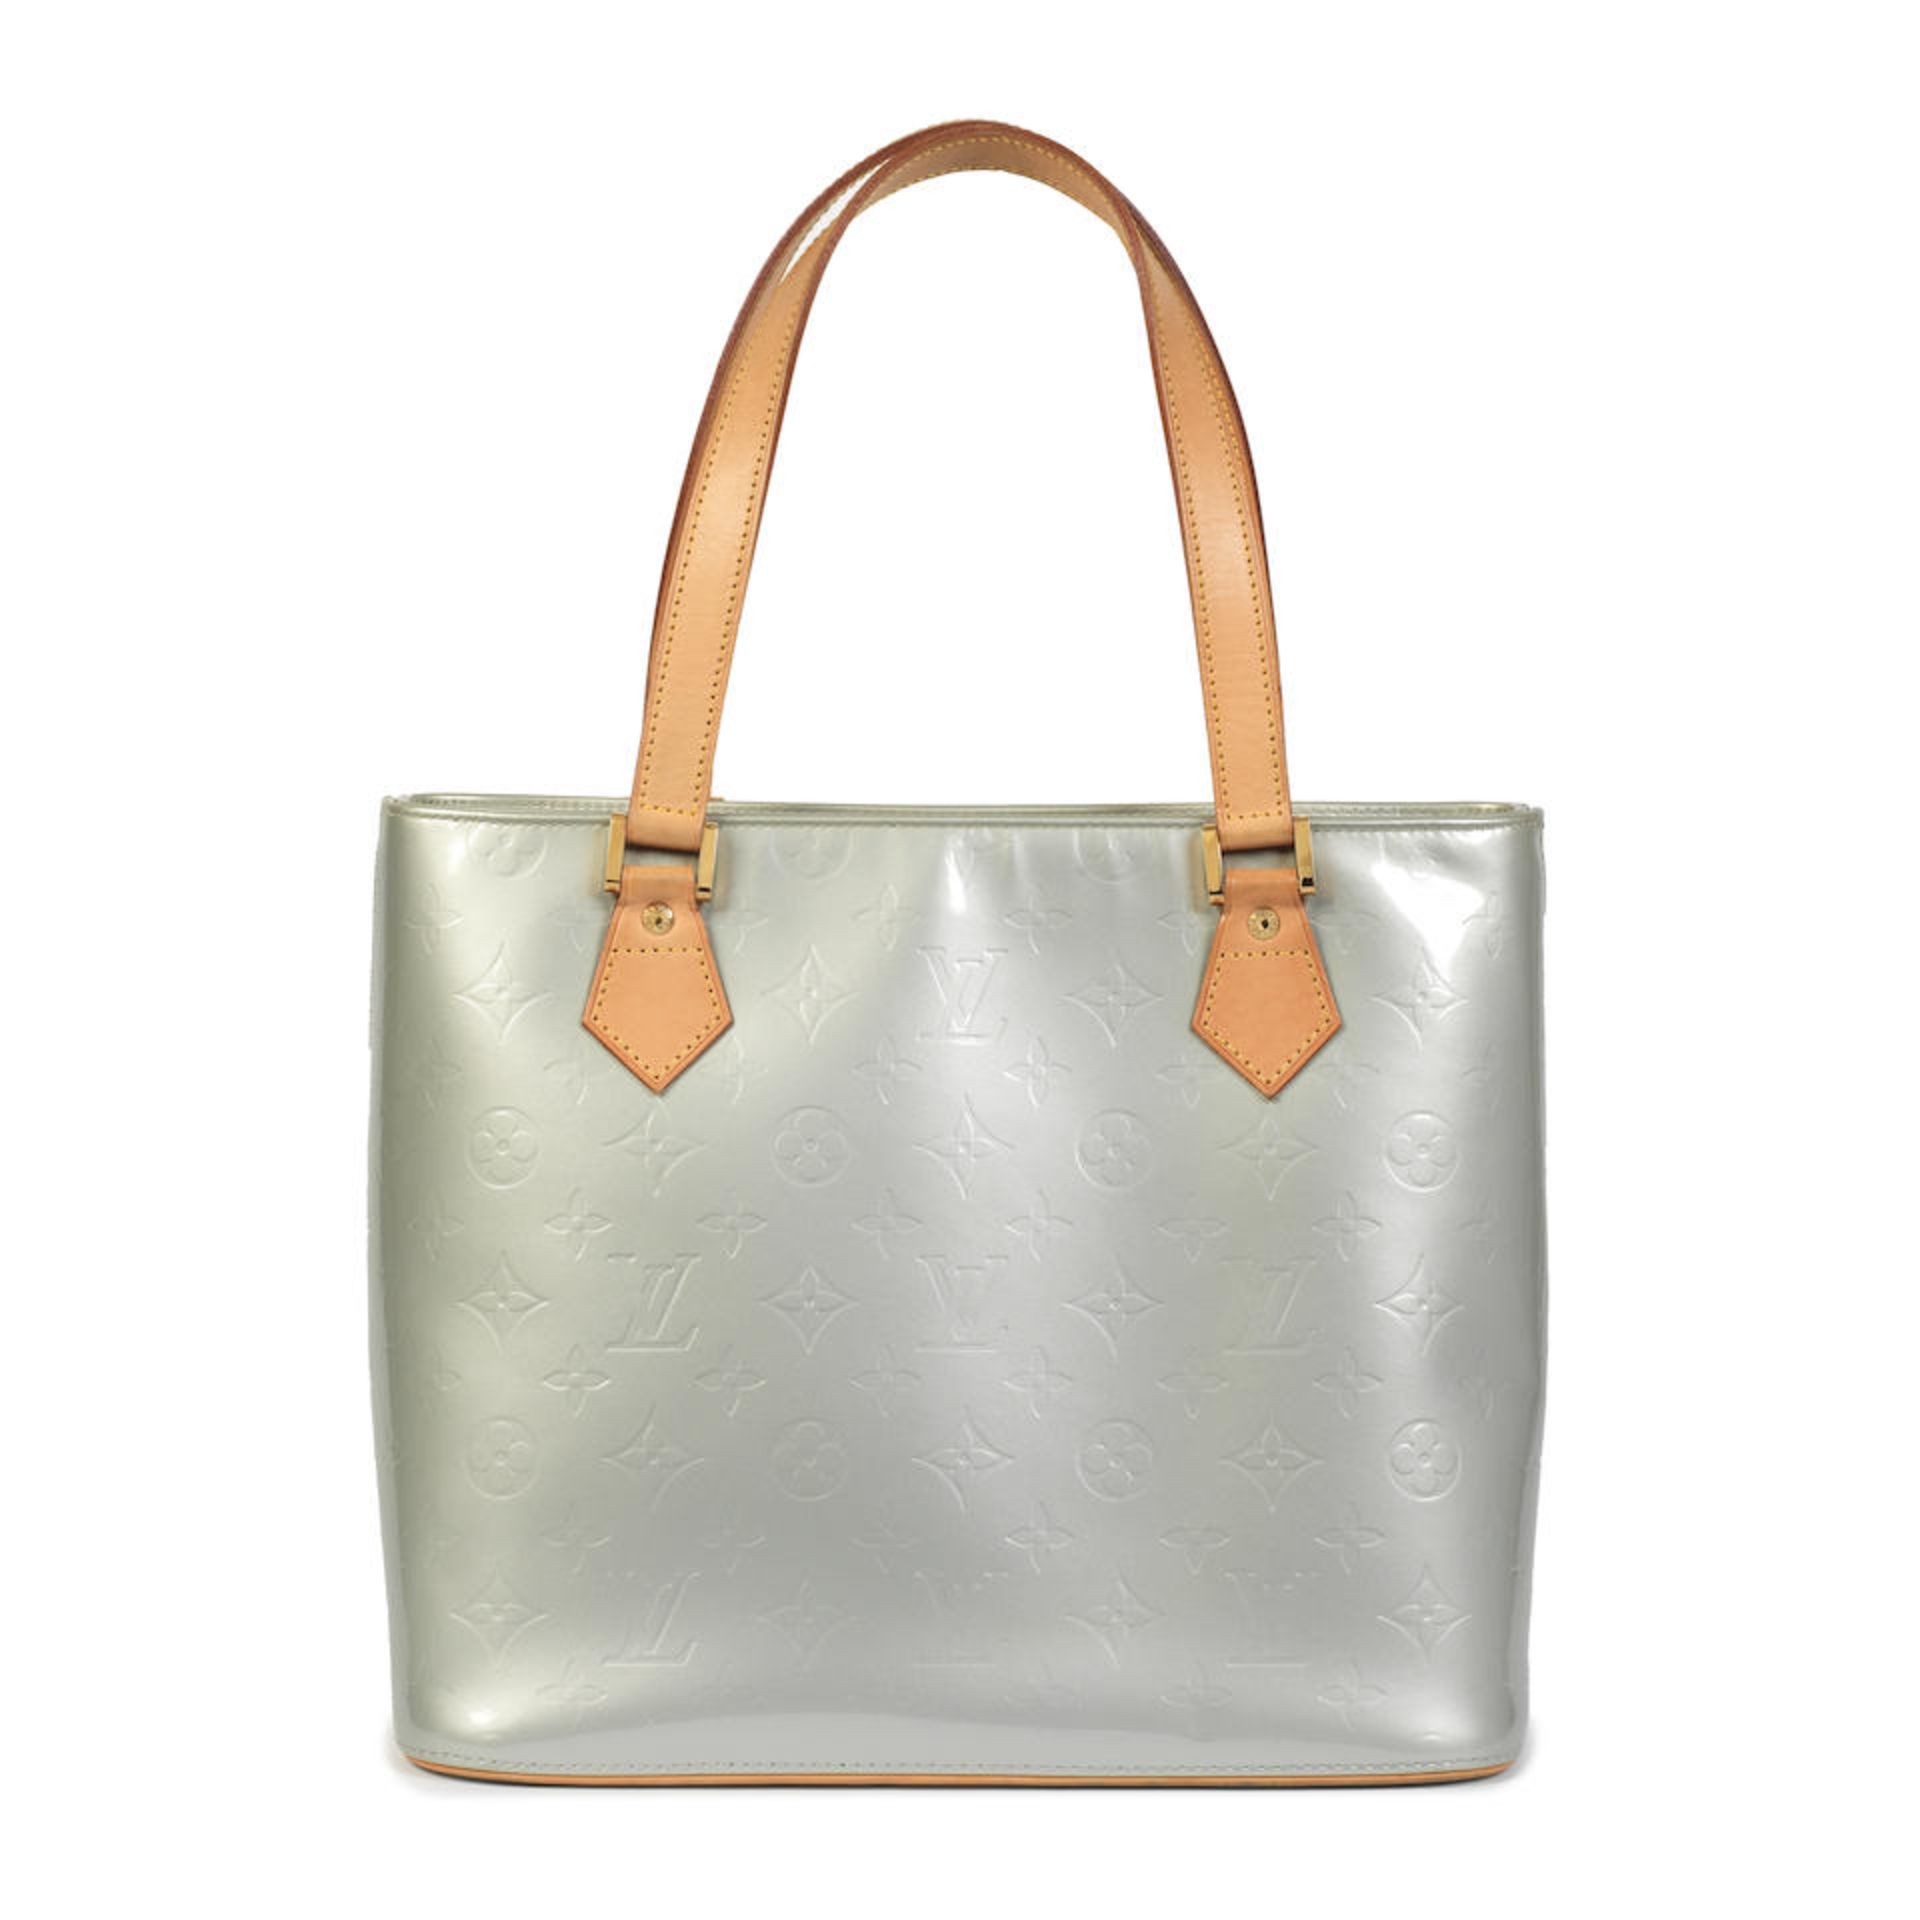 Louis Vuitton: an Ice Grey Monogram Vernis Leather Houston Tote 2001 (includes dust bag)